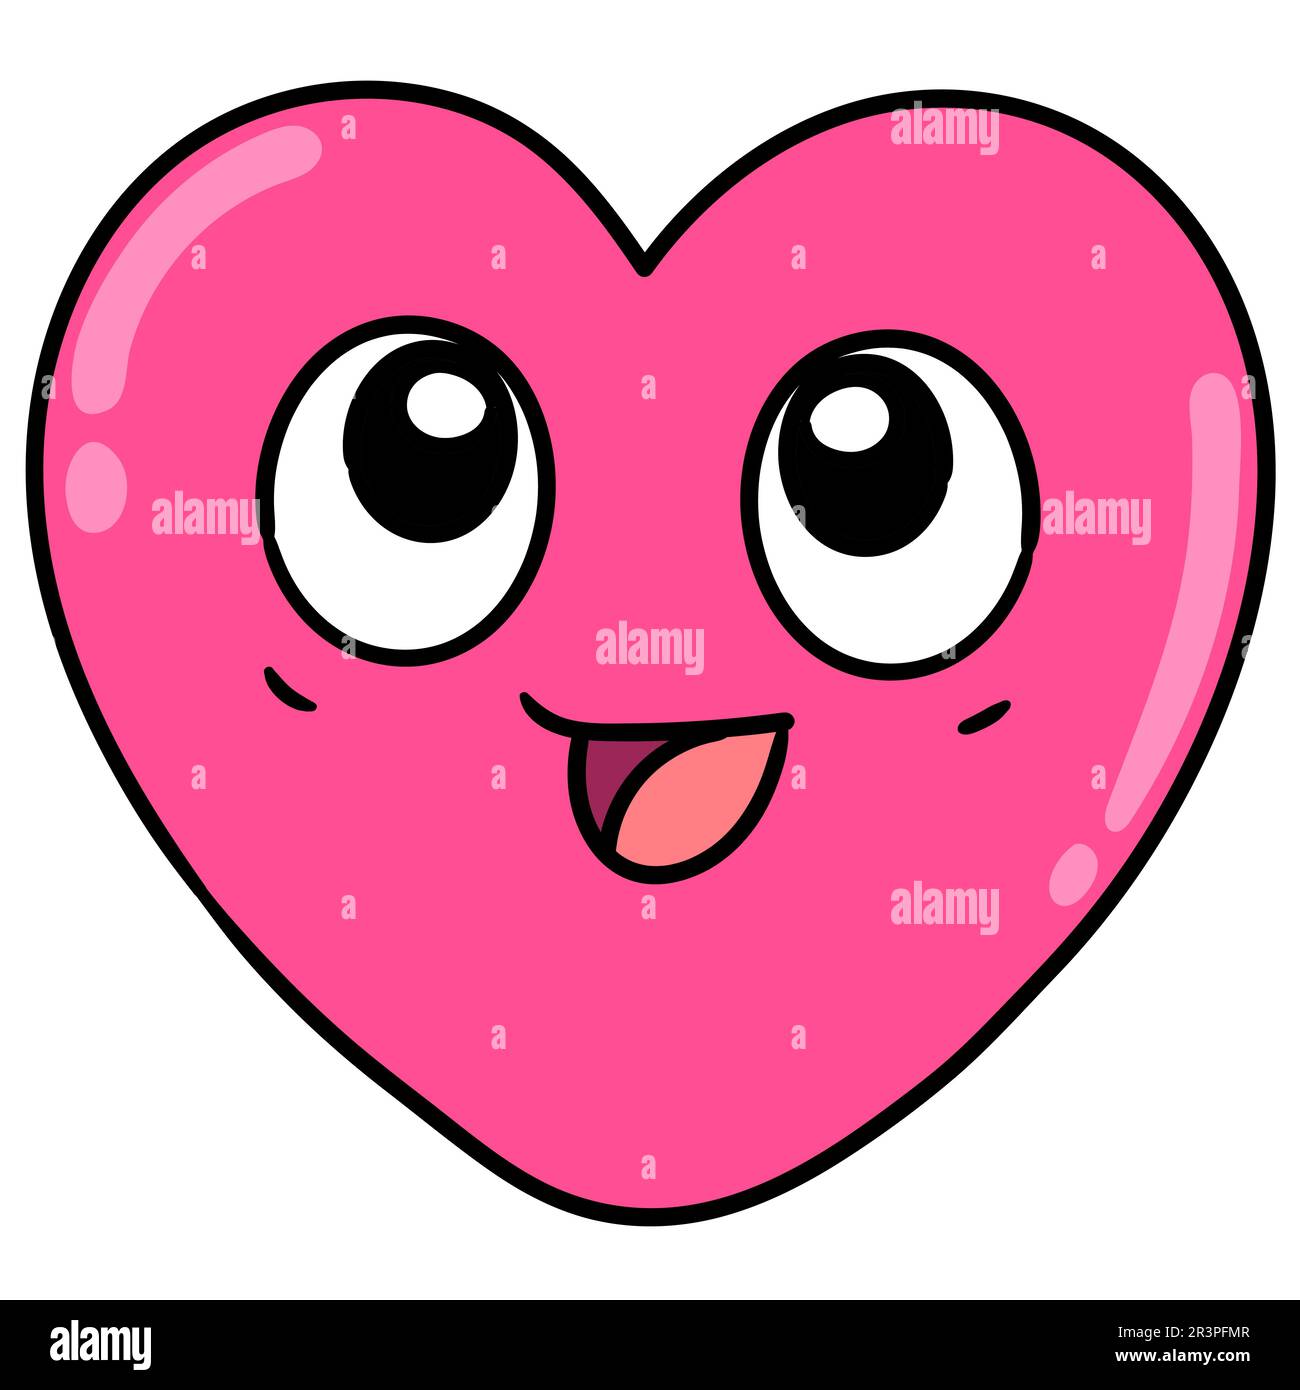 Love kawaii emoticons with happy facial expressions, doodle kawaii. doodle icon image Stock Photo